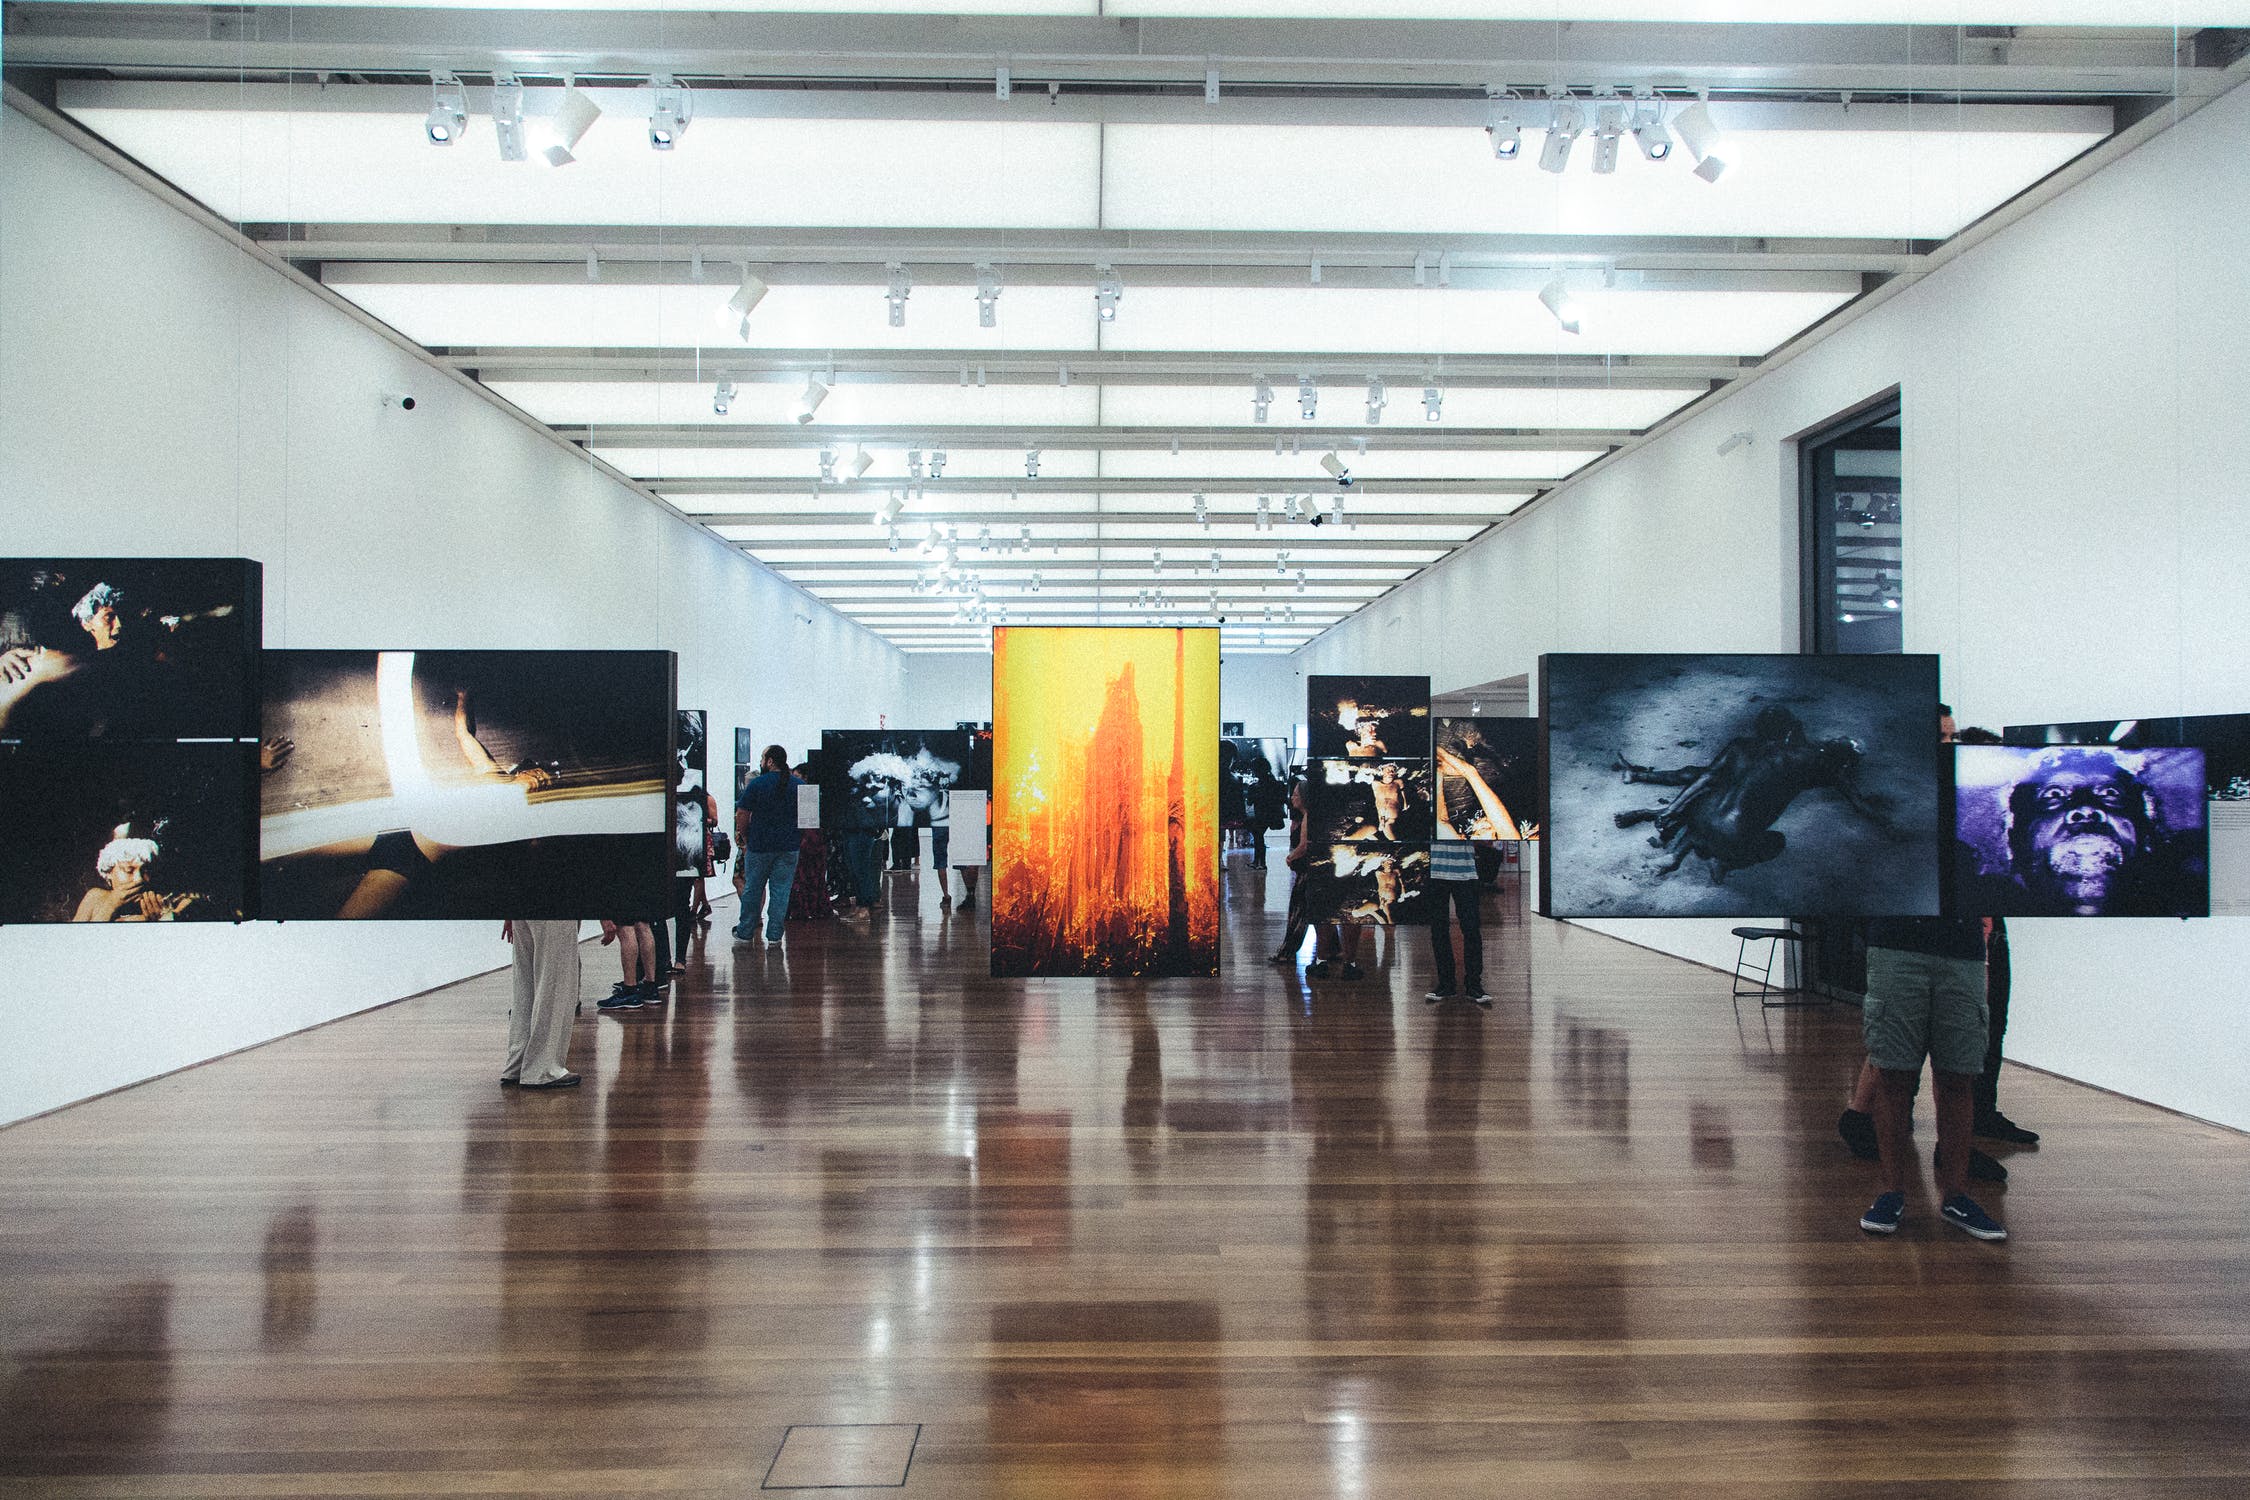 Paintings hanged from the ceiling in an art gallery